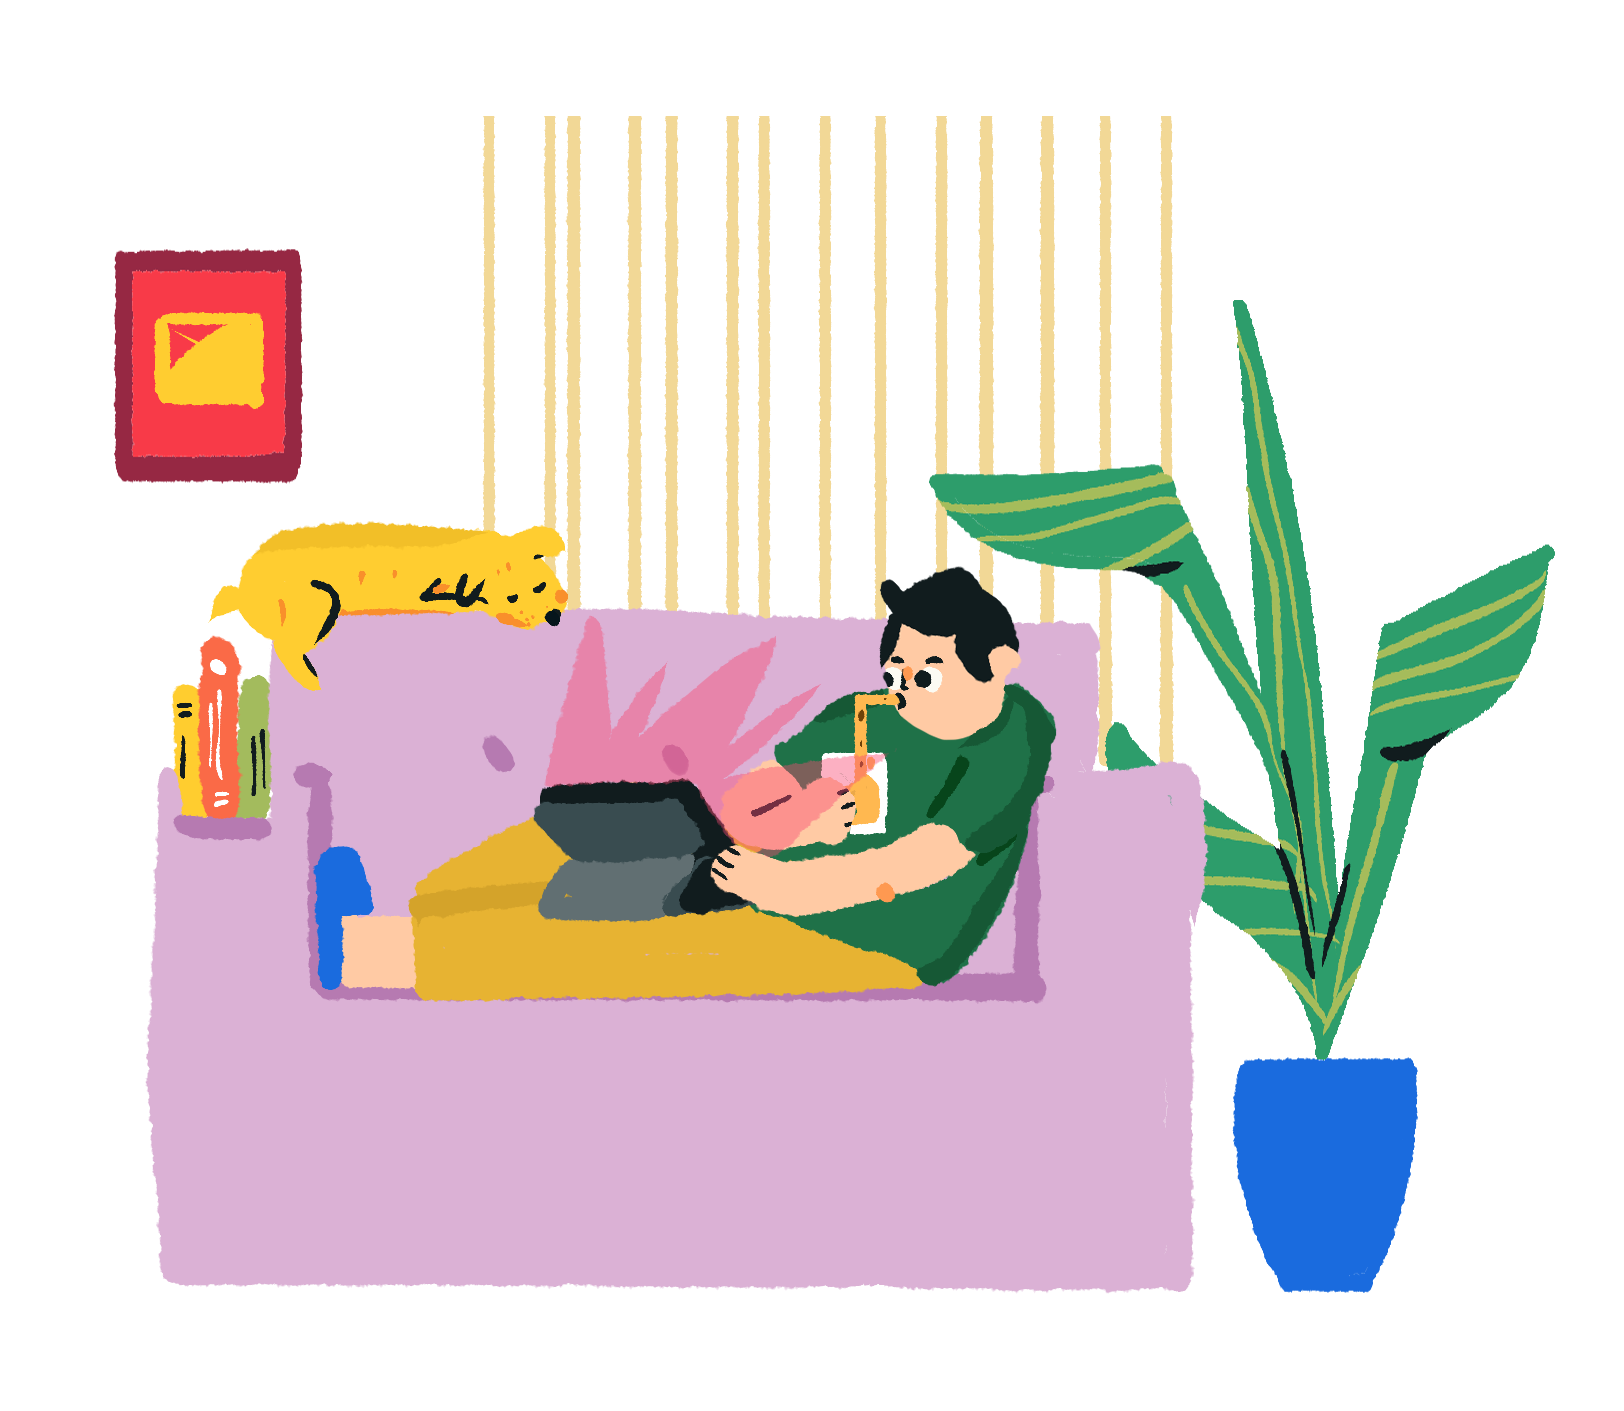 Illustration of a cartoon character sitting in a relaxed position on a couch and sipping a juice box, with a laptop open in front of them. The home is decorated brightly, and a dog lies napping on the couch.